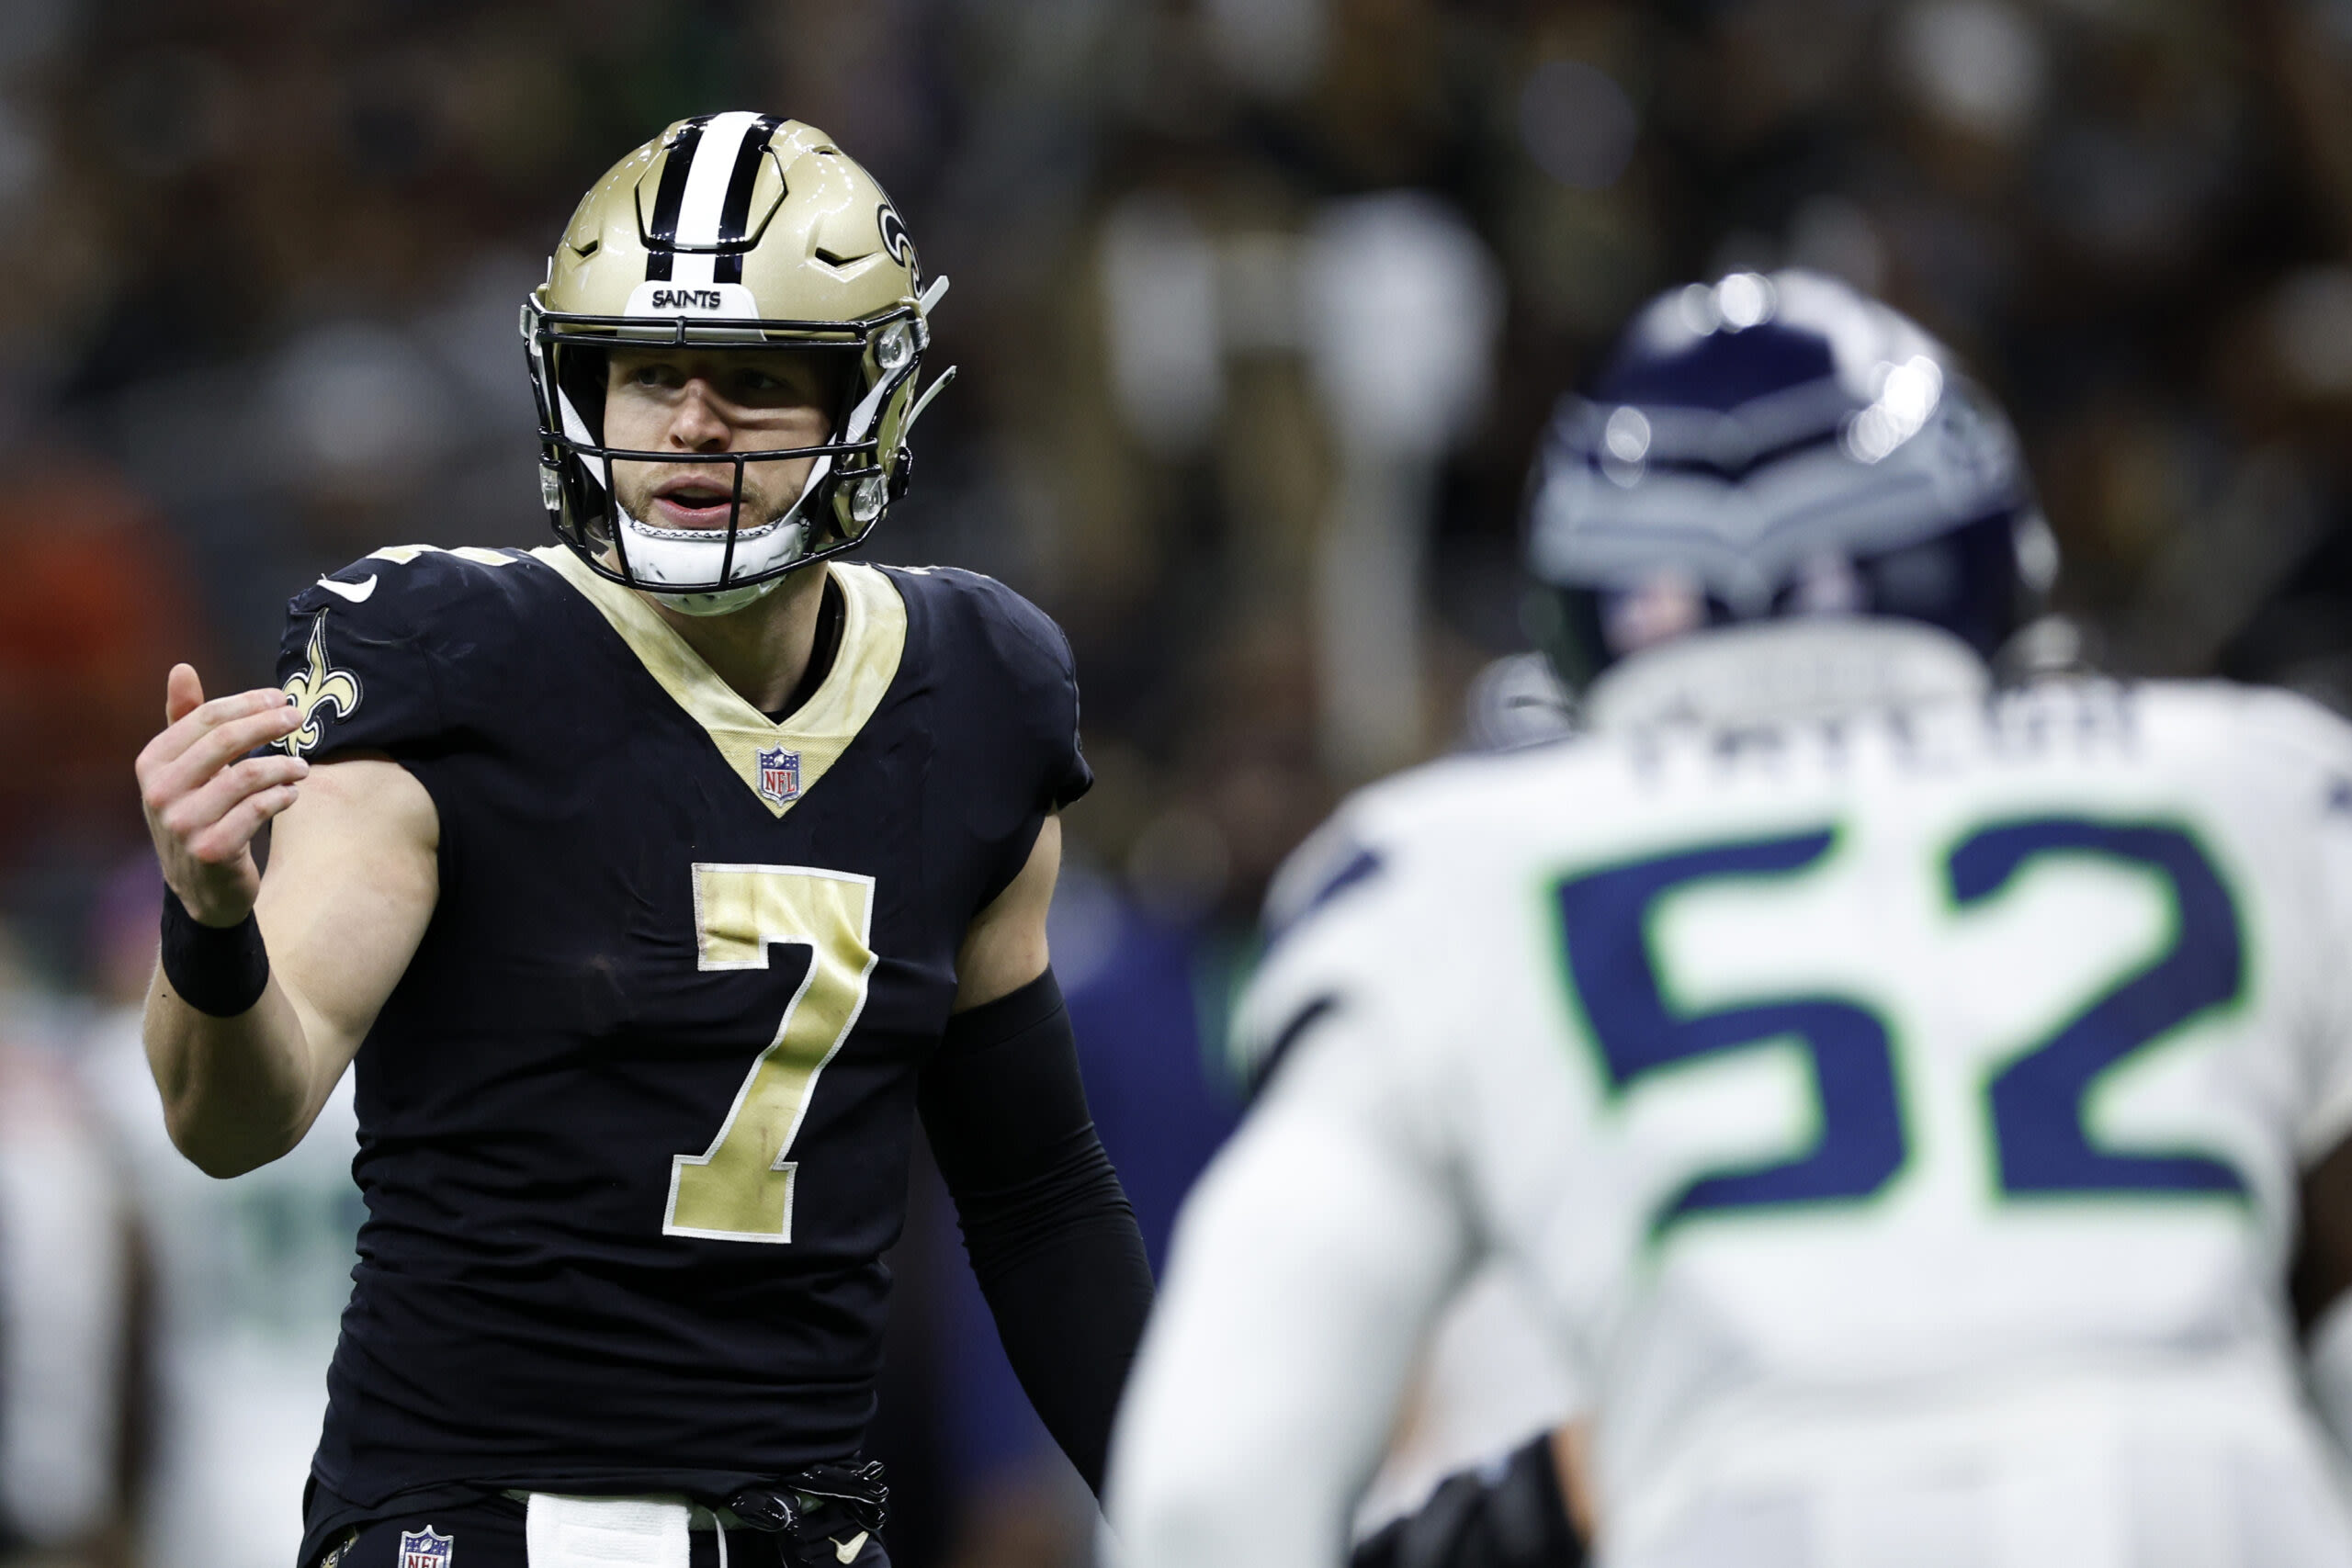 Taysom Hill’s 60-yard touchdown run is the Saints Play of the Day